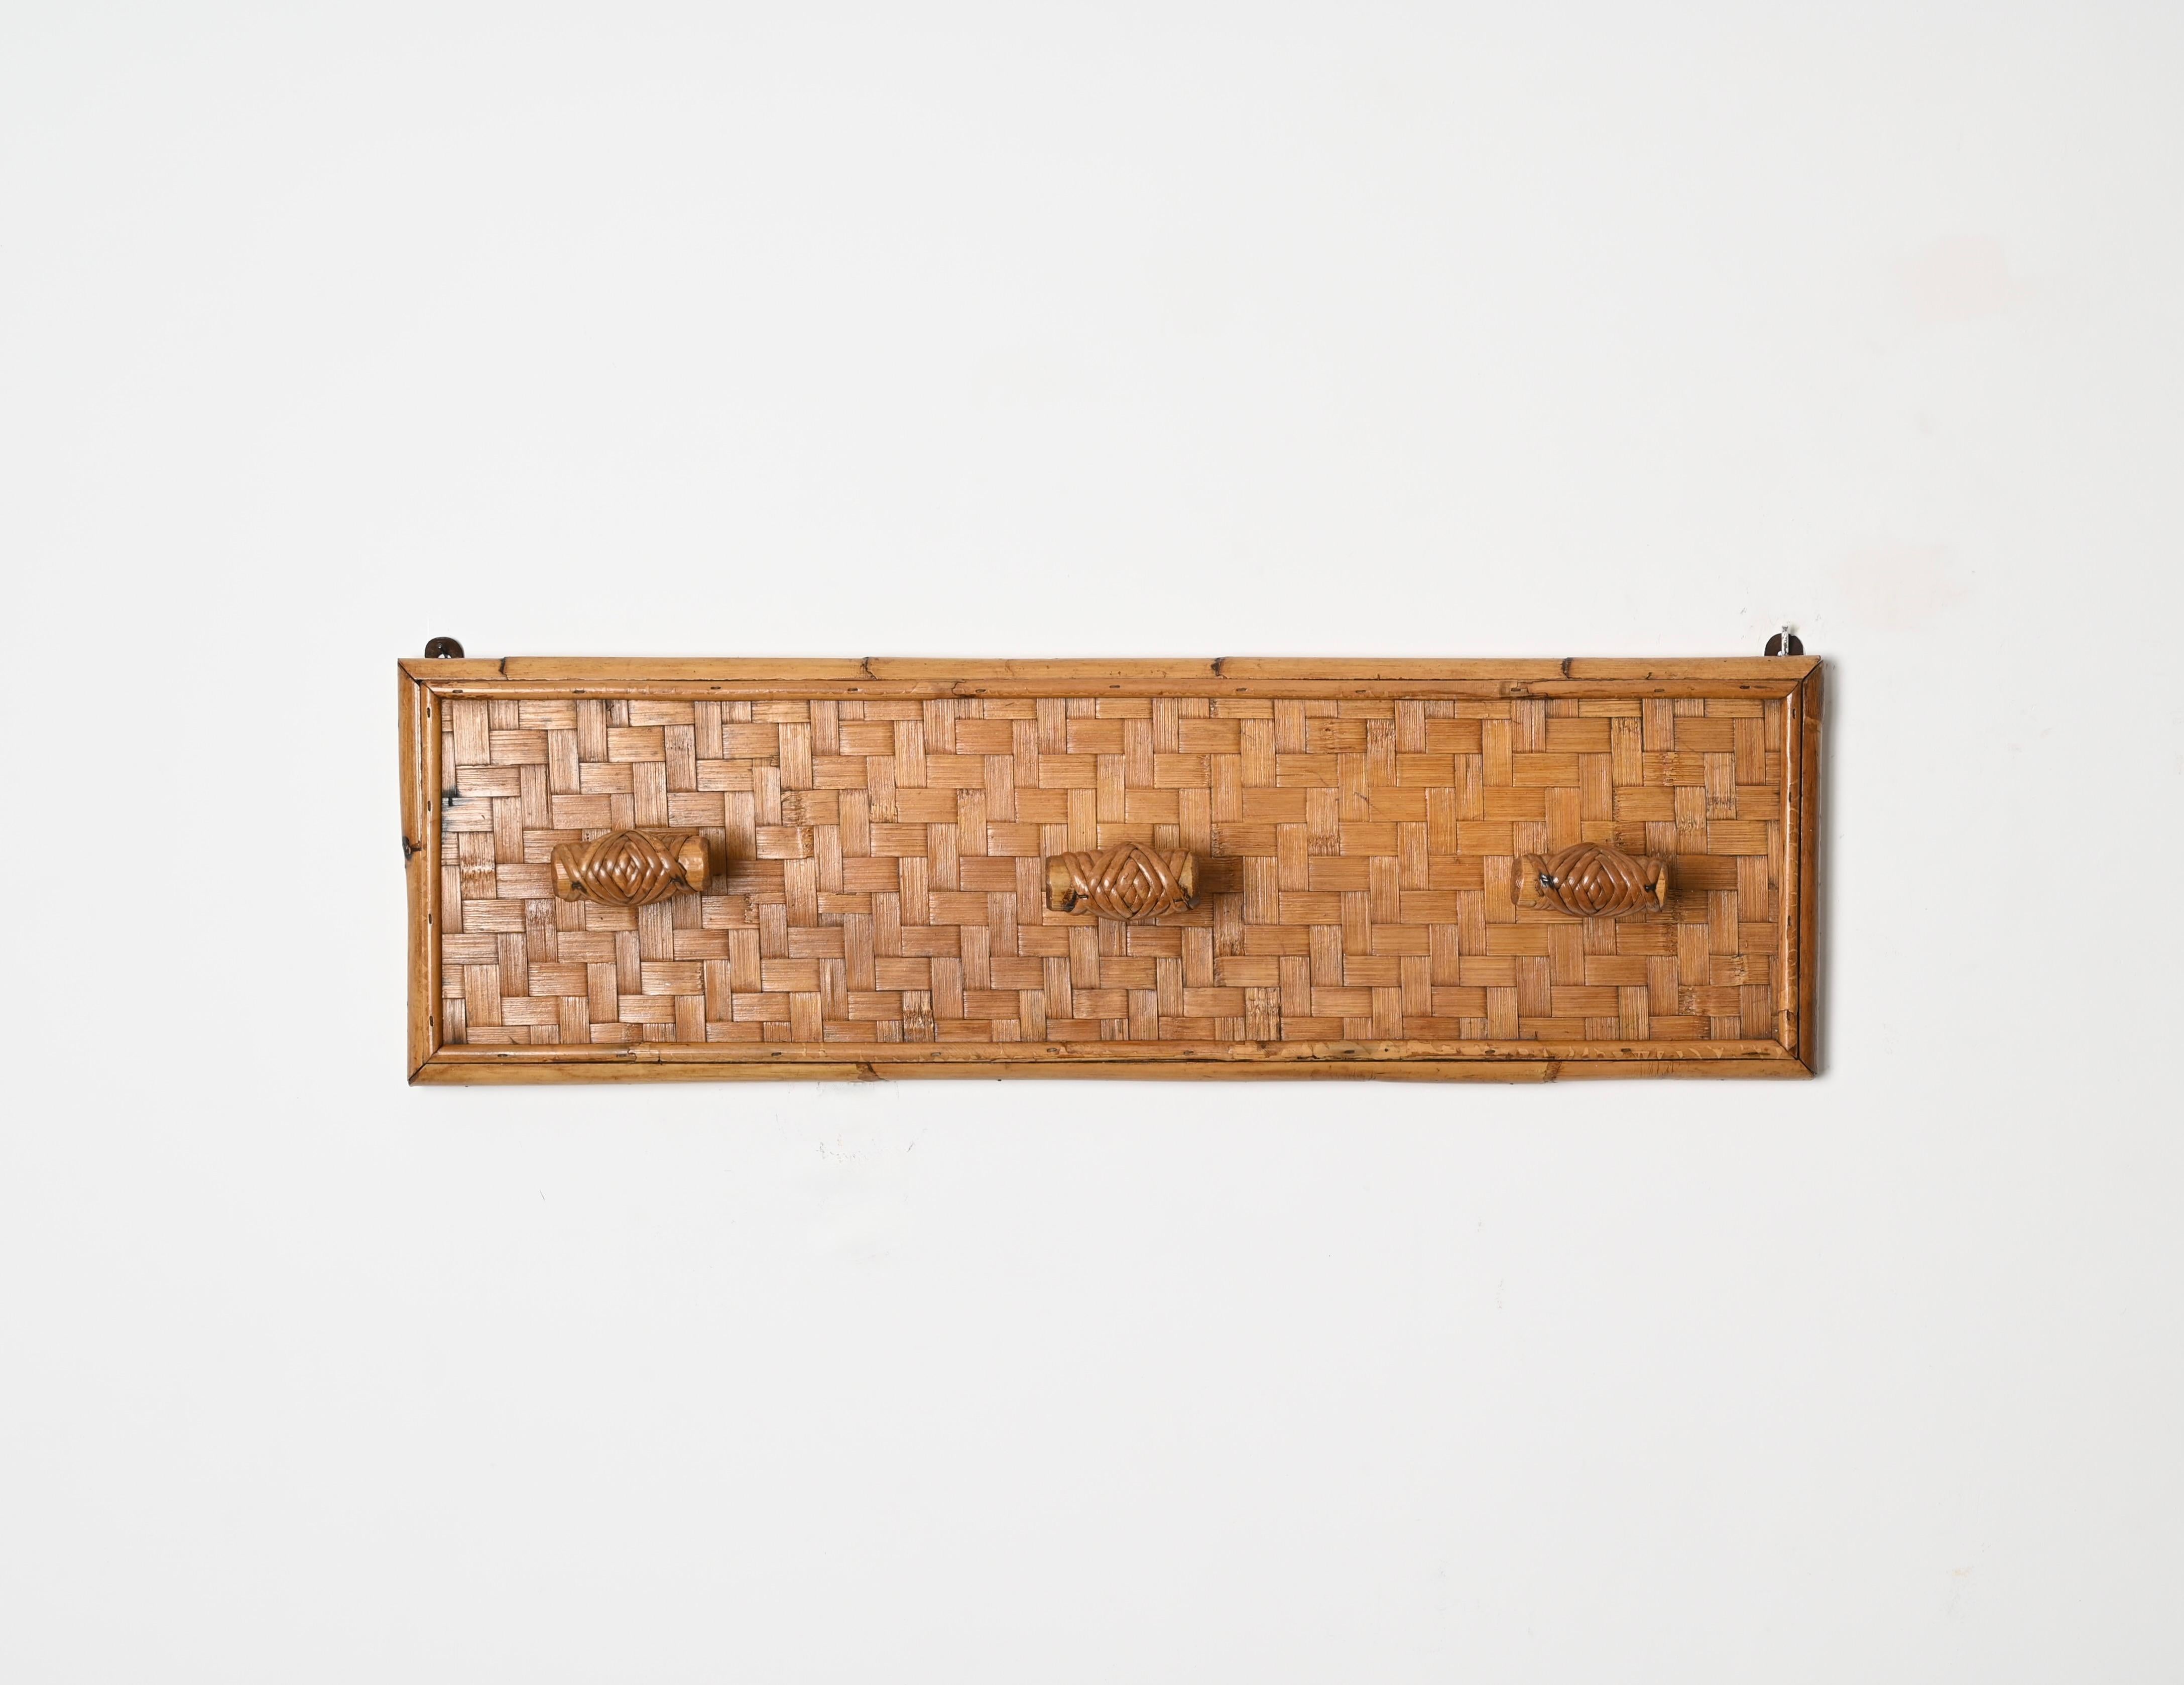 French Riviera Three Hook Coat Rack in Wicker, Rattan and Bamboo, Italy 1960s For Sale 1